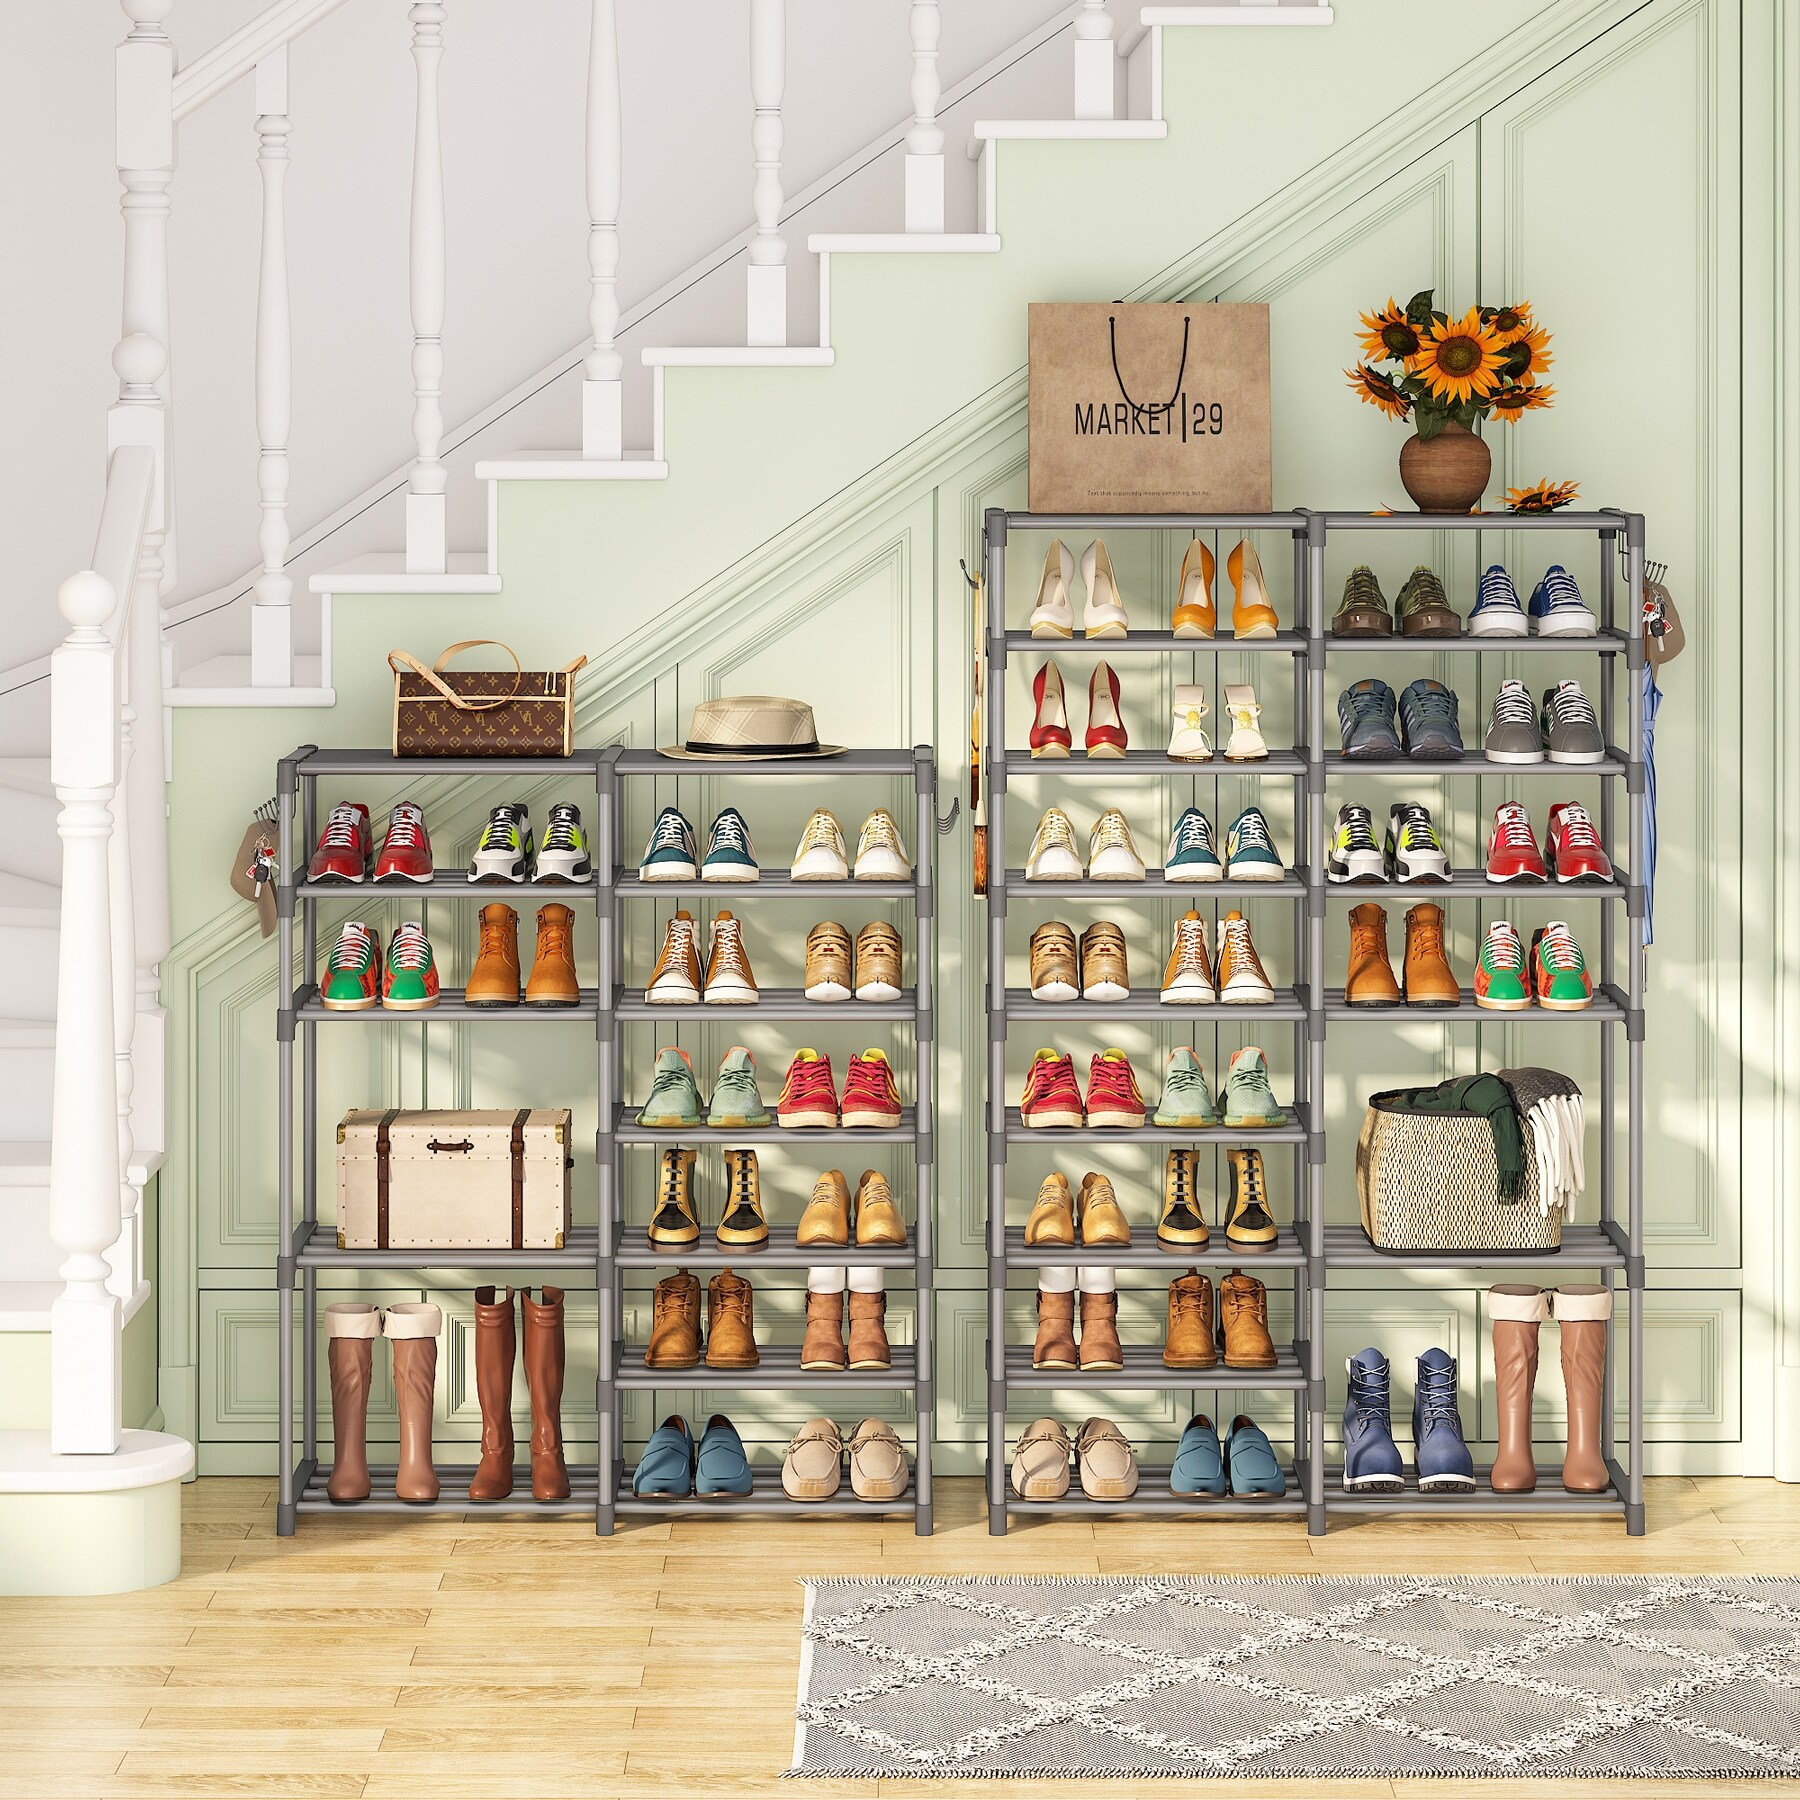 https://ak1.ostkcdn.com/images/products/is/images/direct/897ab81f4f611b4a639a2e269533dea2a7b7d27c/32-40-Pairs-Shoe-and-Boot-Storage-Shelf-Rack-Organizer-with-Hooks%2C9-Tiers-Stackable-Shoes-Stand-Tower-for-Closet.jpg